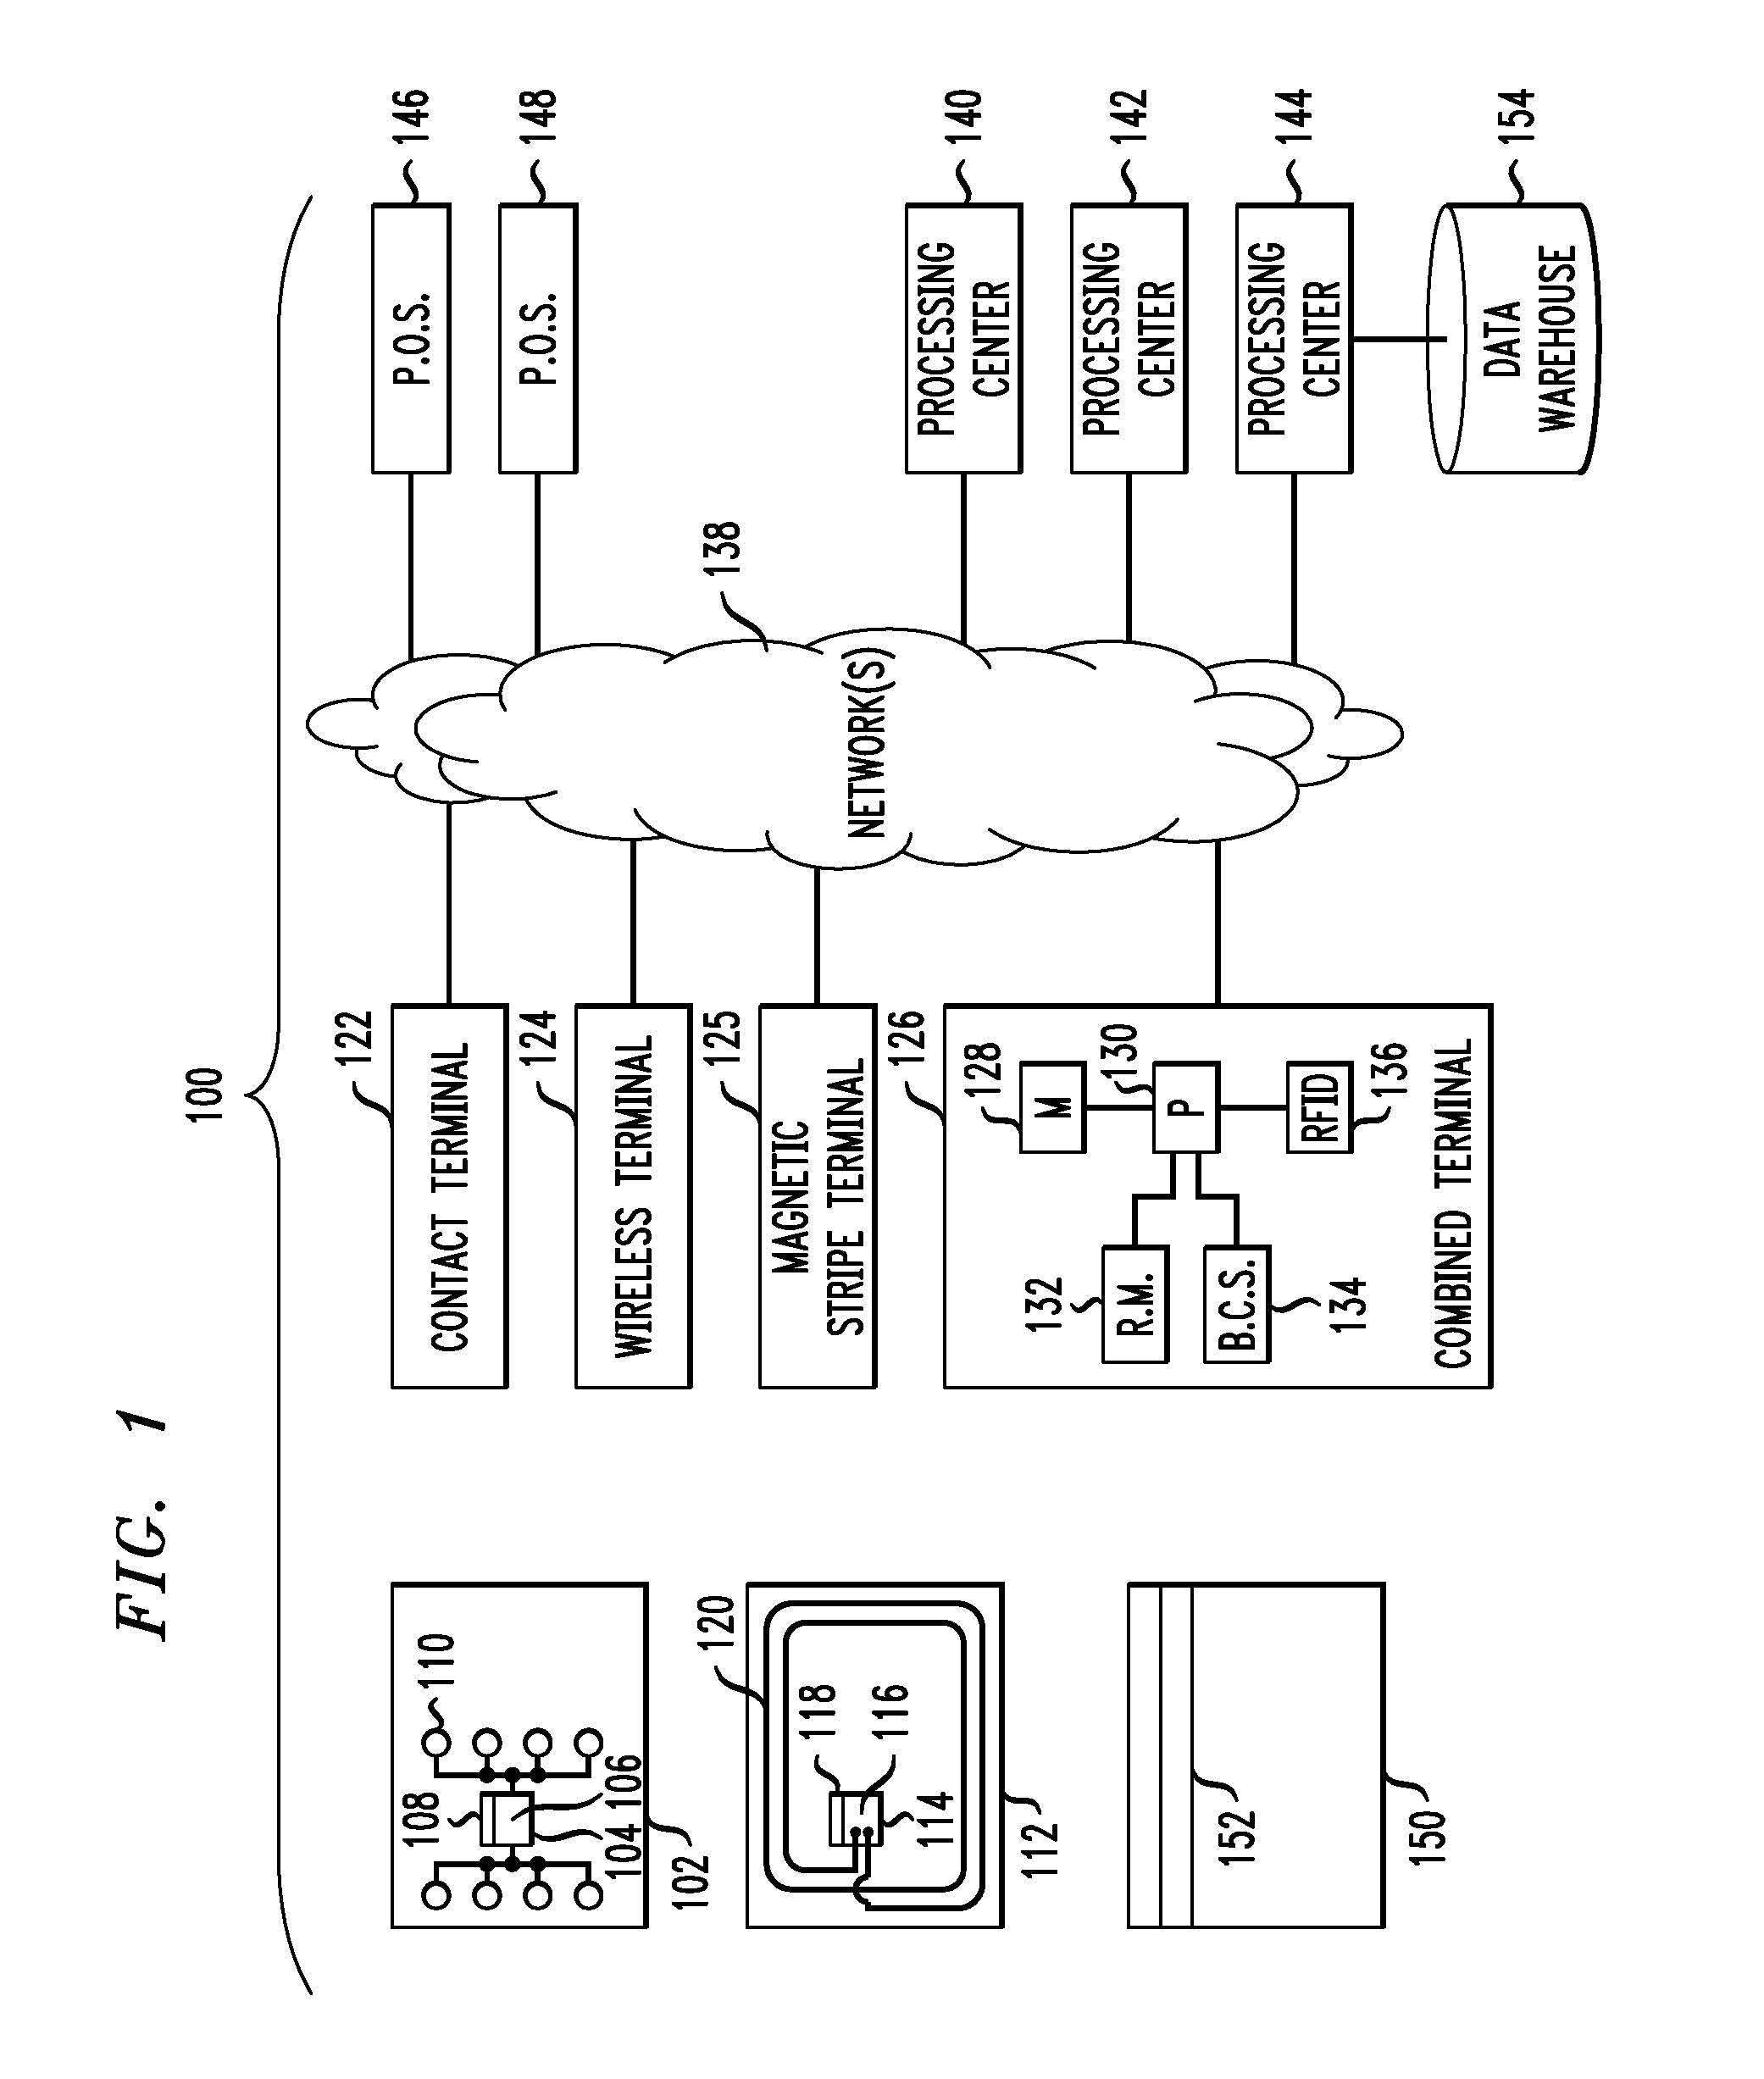 Method and System for Enabling Item-Level Approval of Payment Card